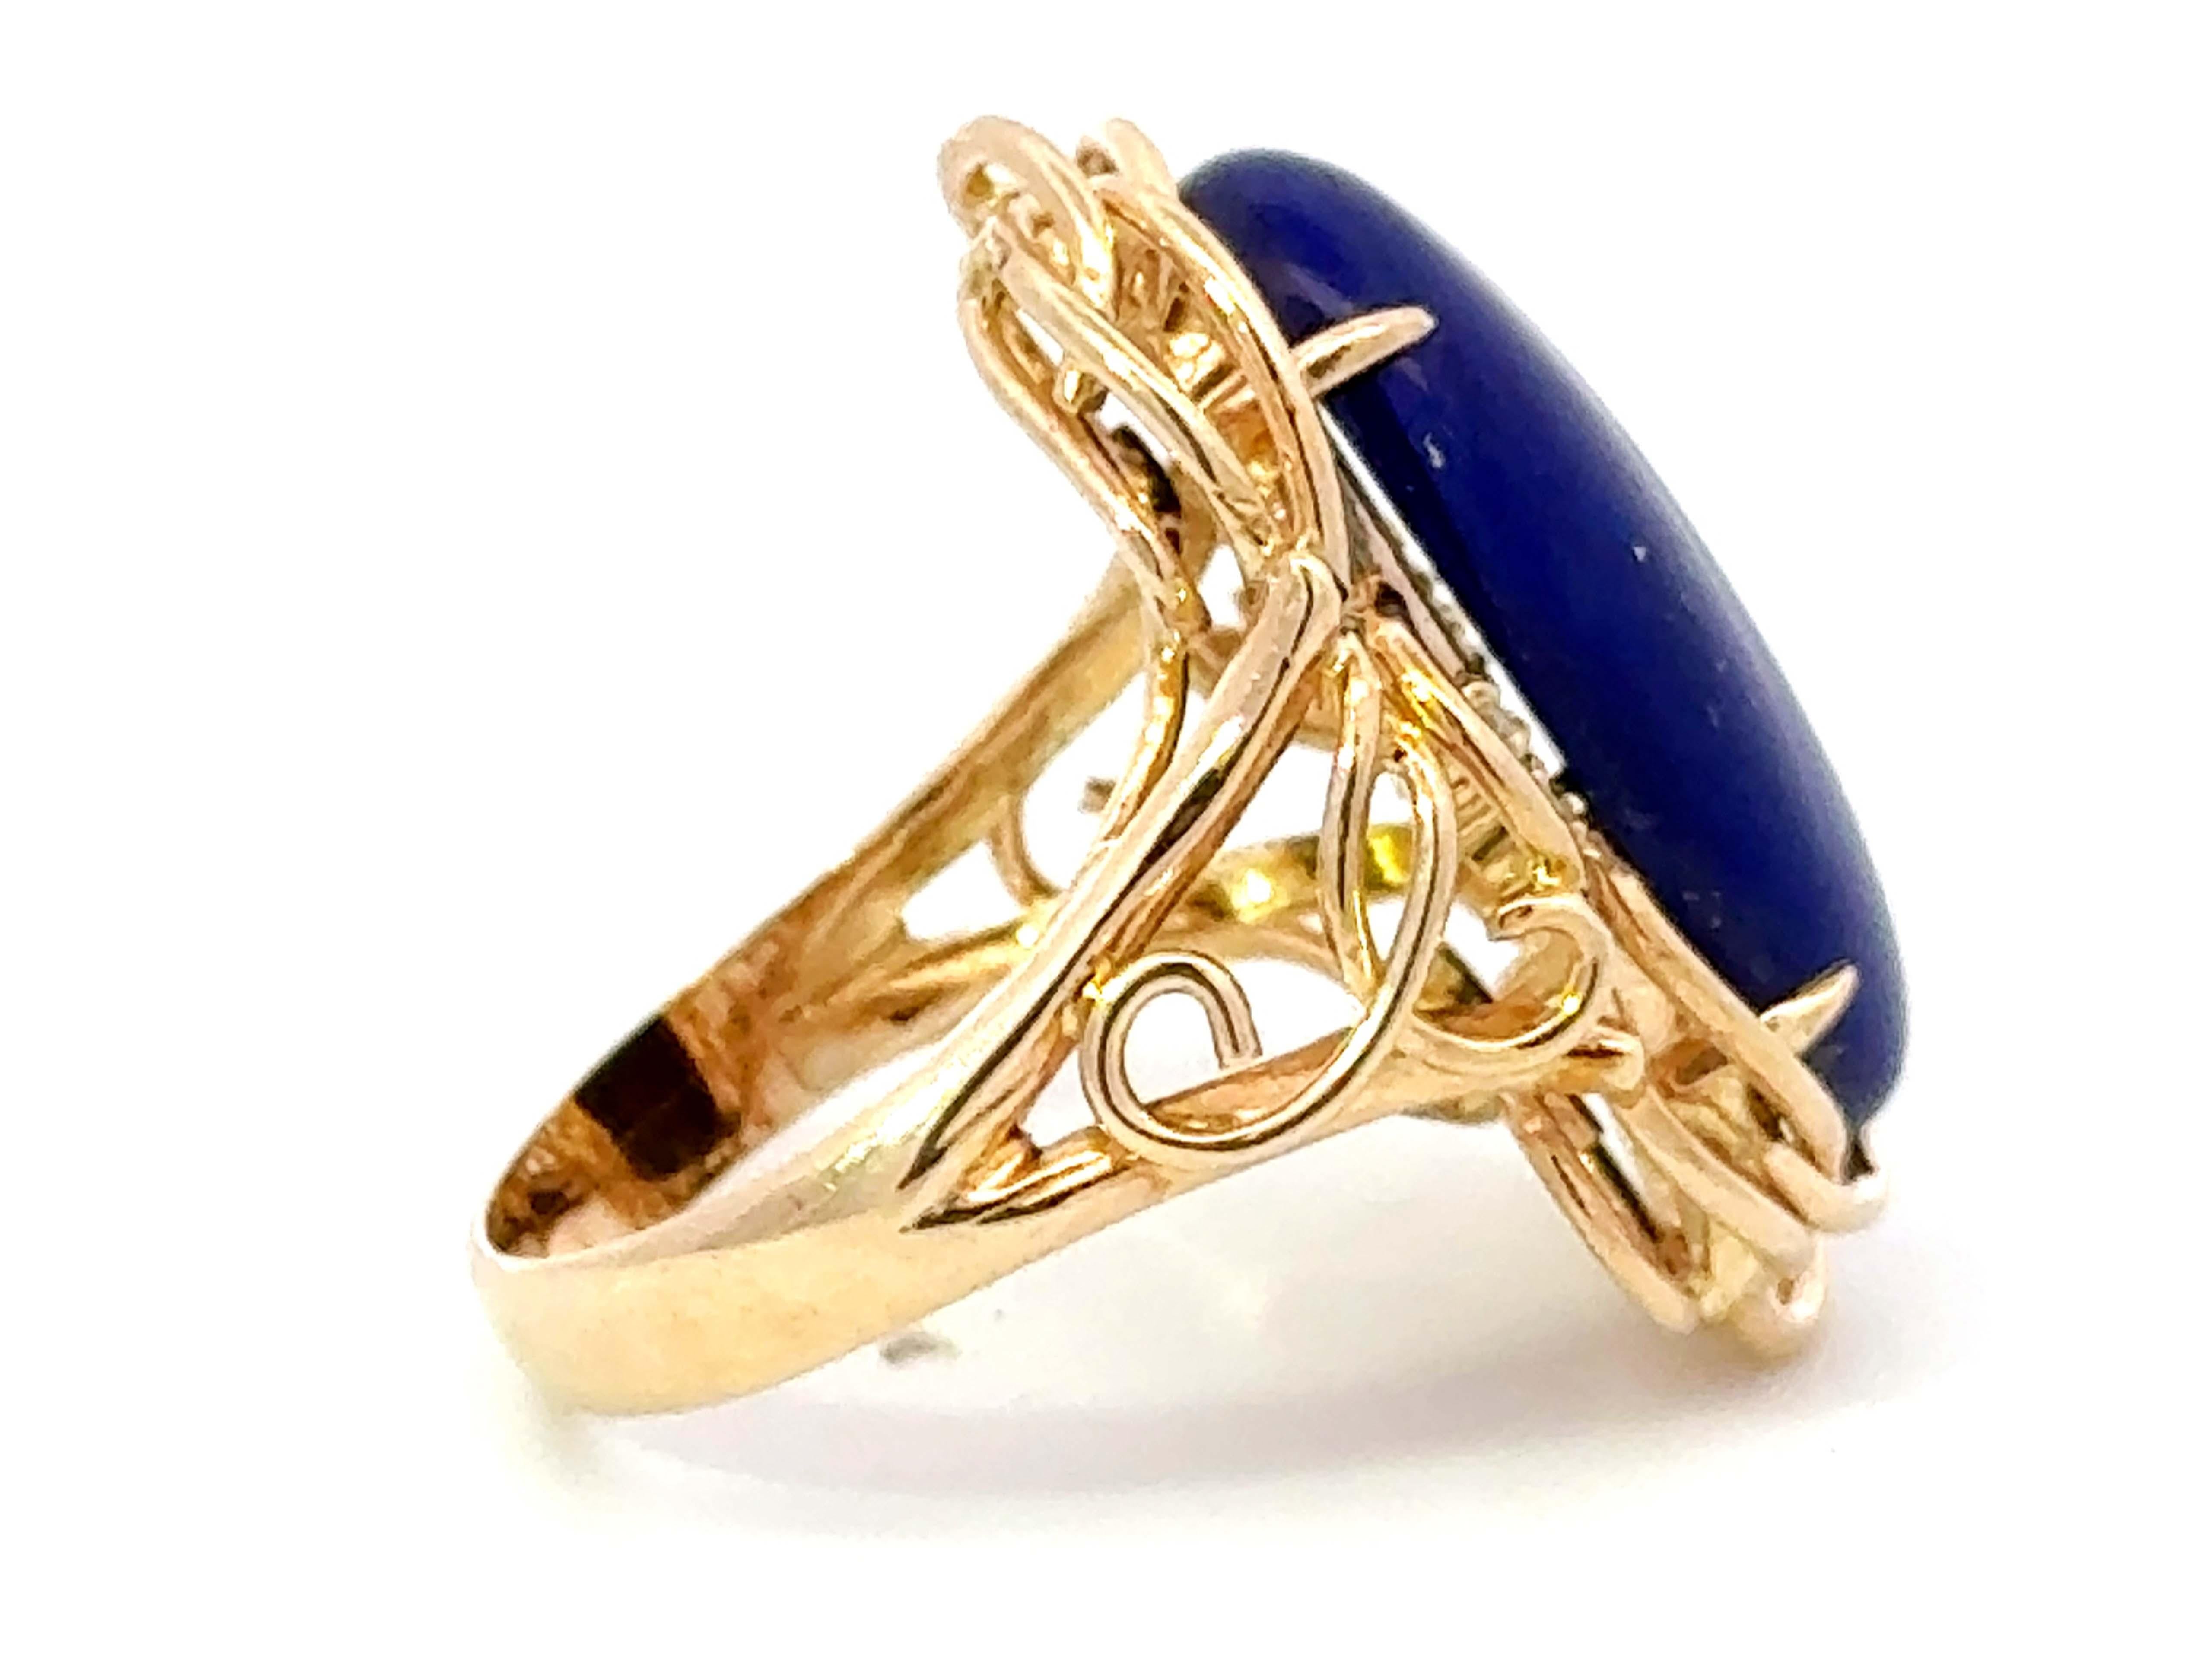 Large Lapis Lazuli Diamond Cocktail Ring 14k Yellow Gold In Excellent Condition For Sale In Honolulu, HI